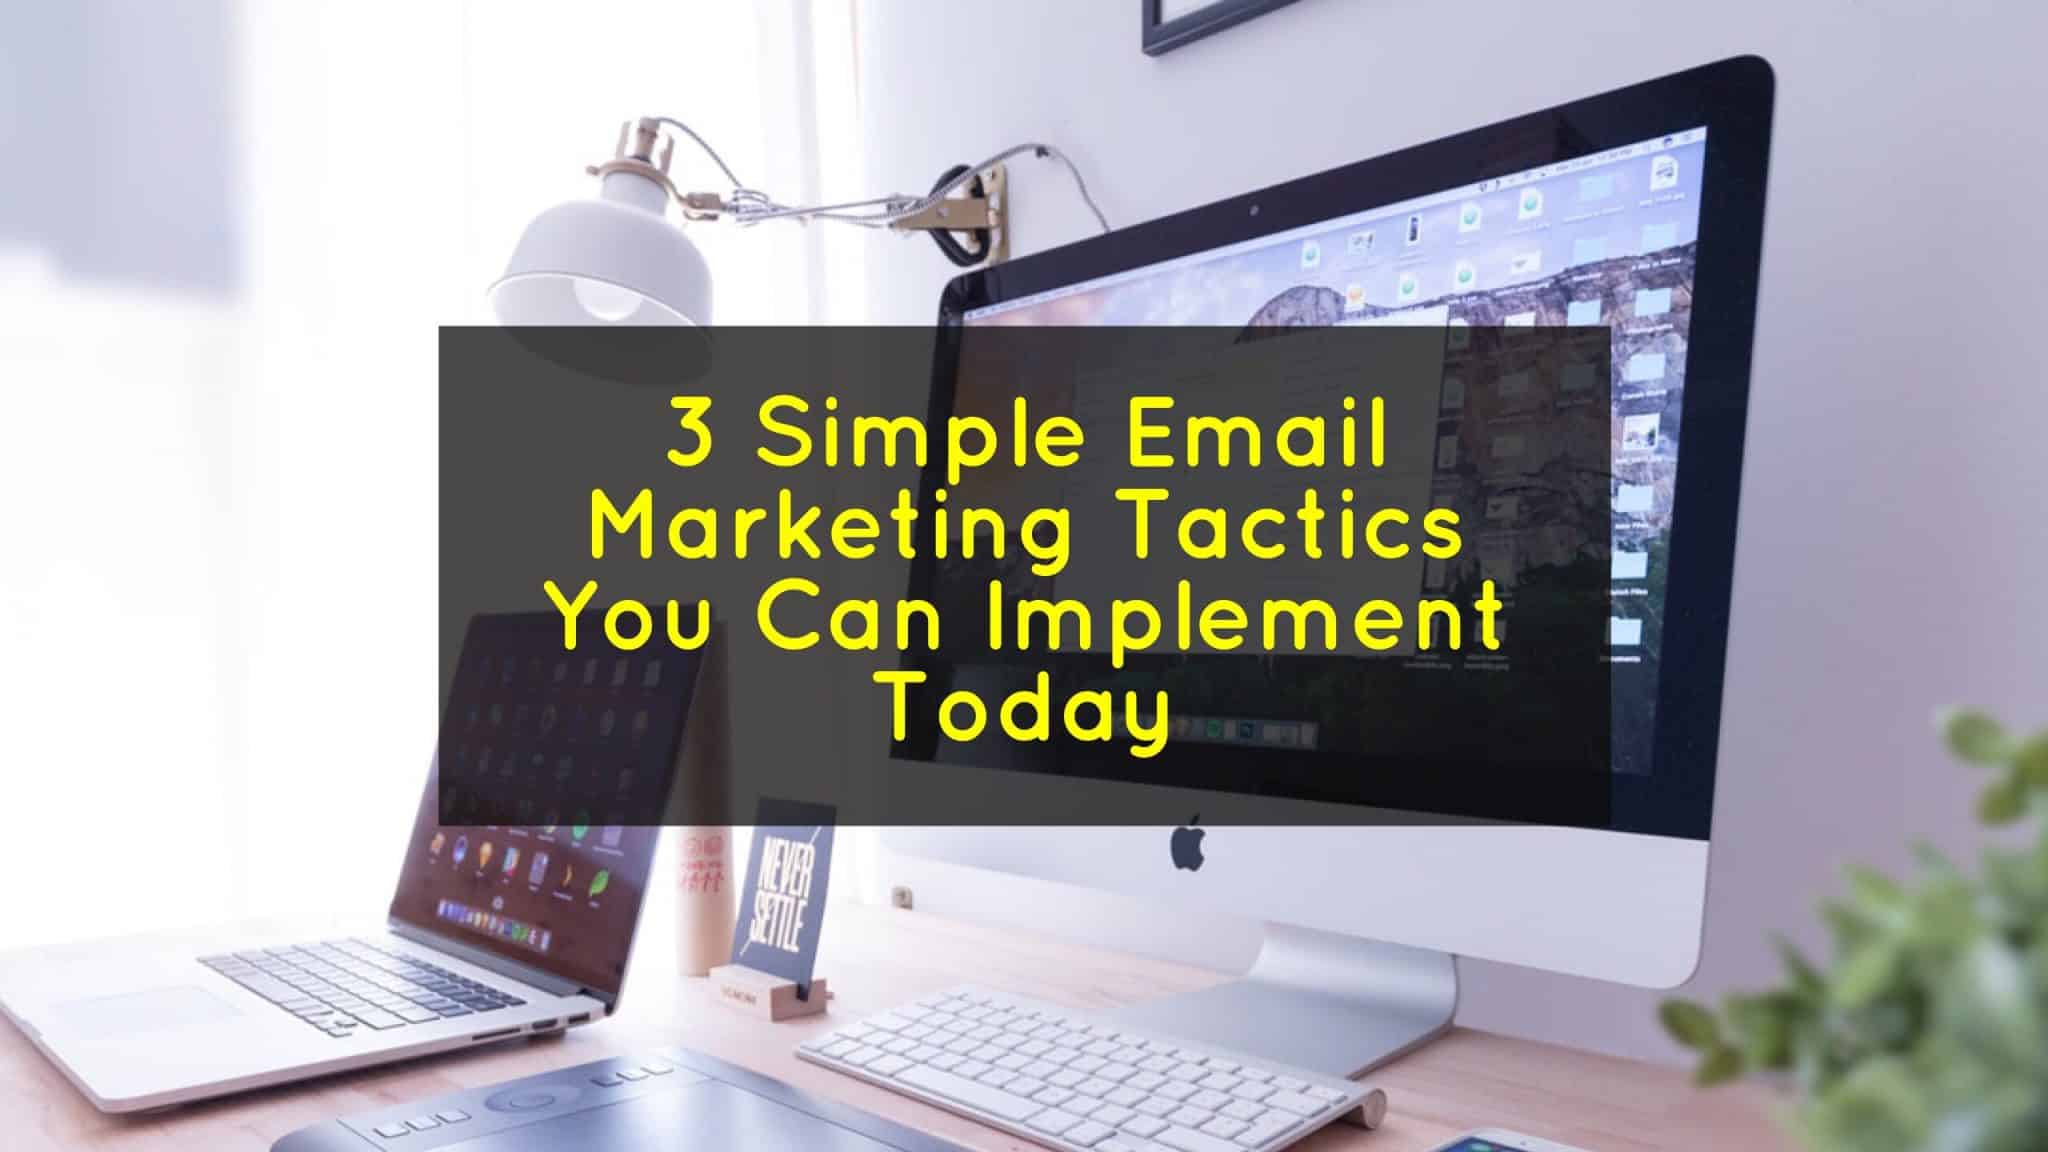 3 Simple Email Marketing Tactics You Can Implement Today